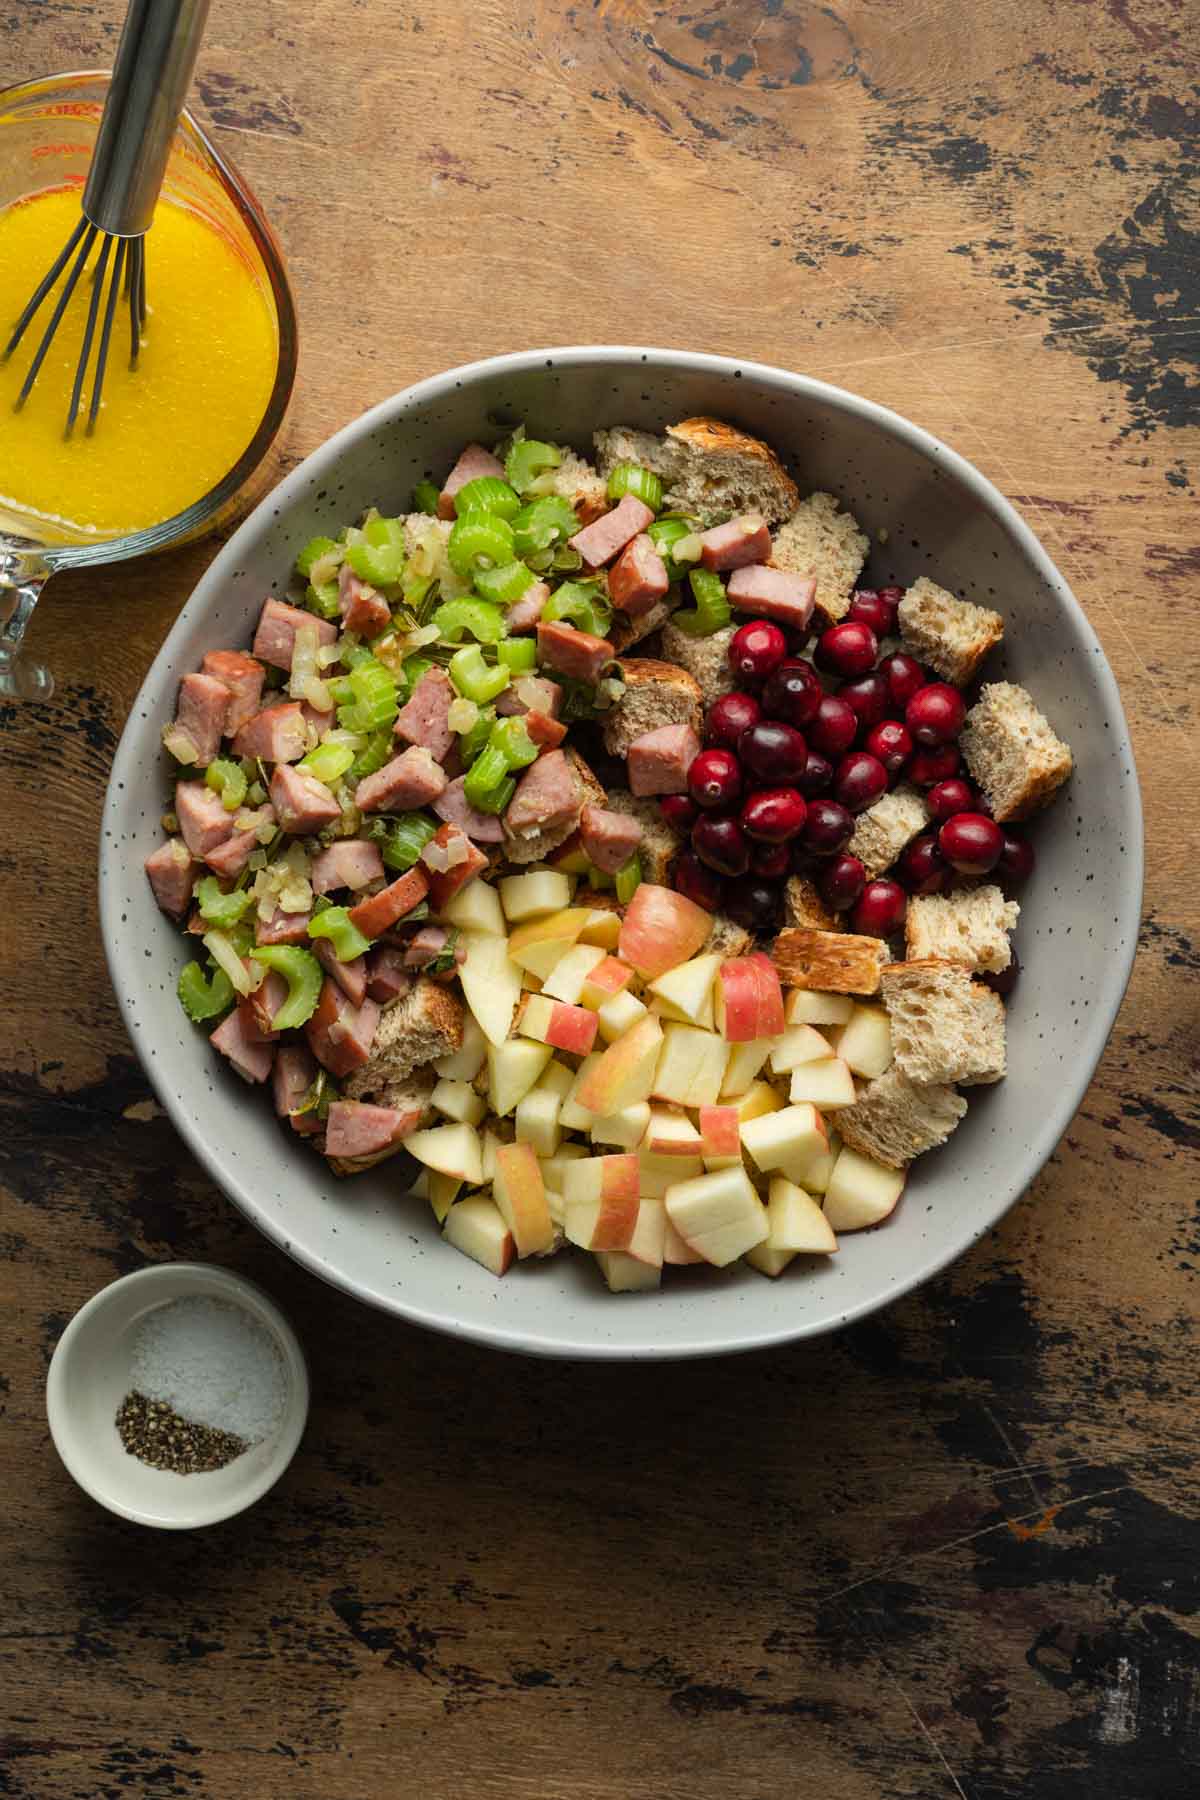 Stuffing ingredients added to a large grey bowl.